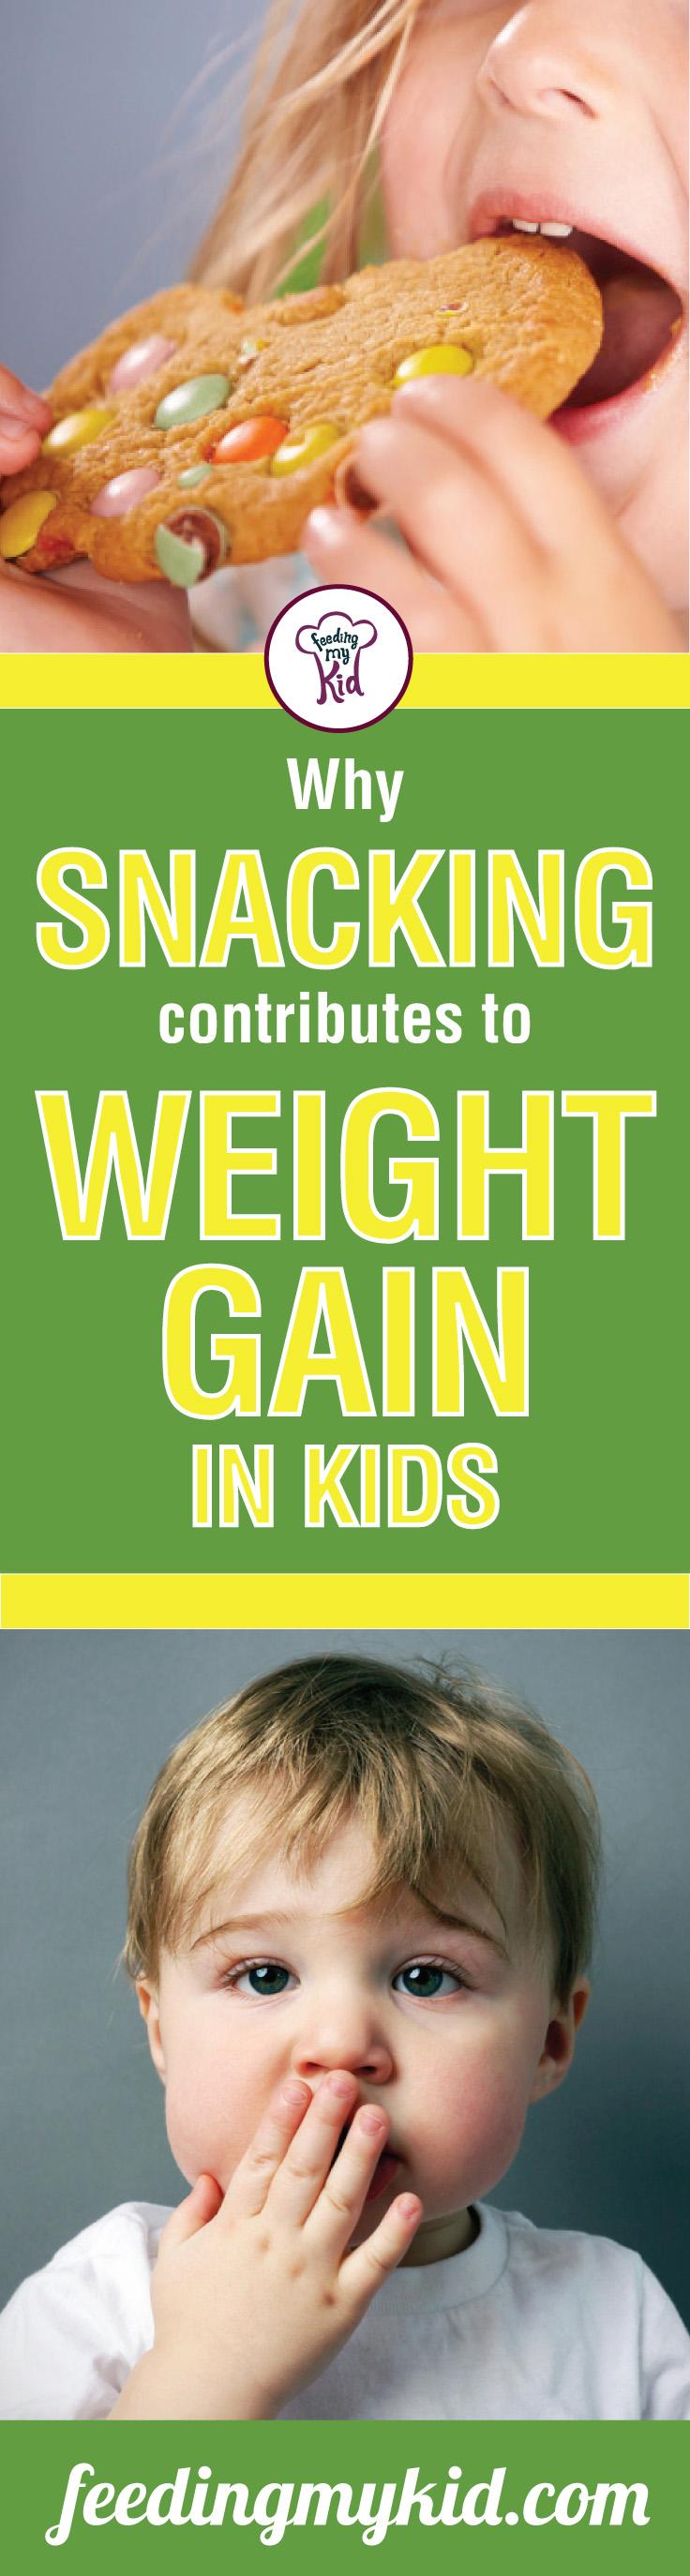 Why Snacking Contributes to Weight Gain in Kids